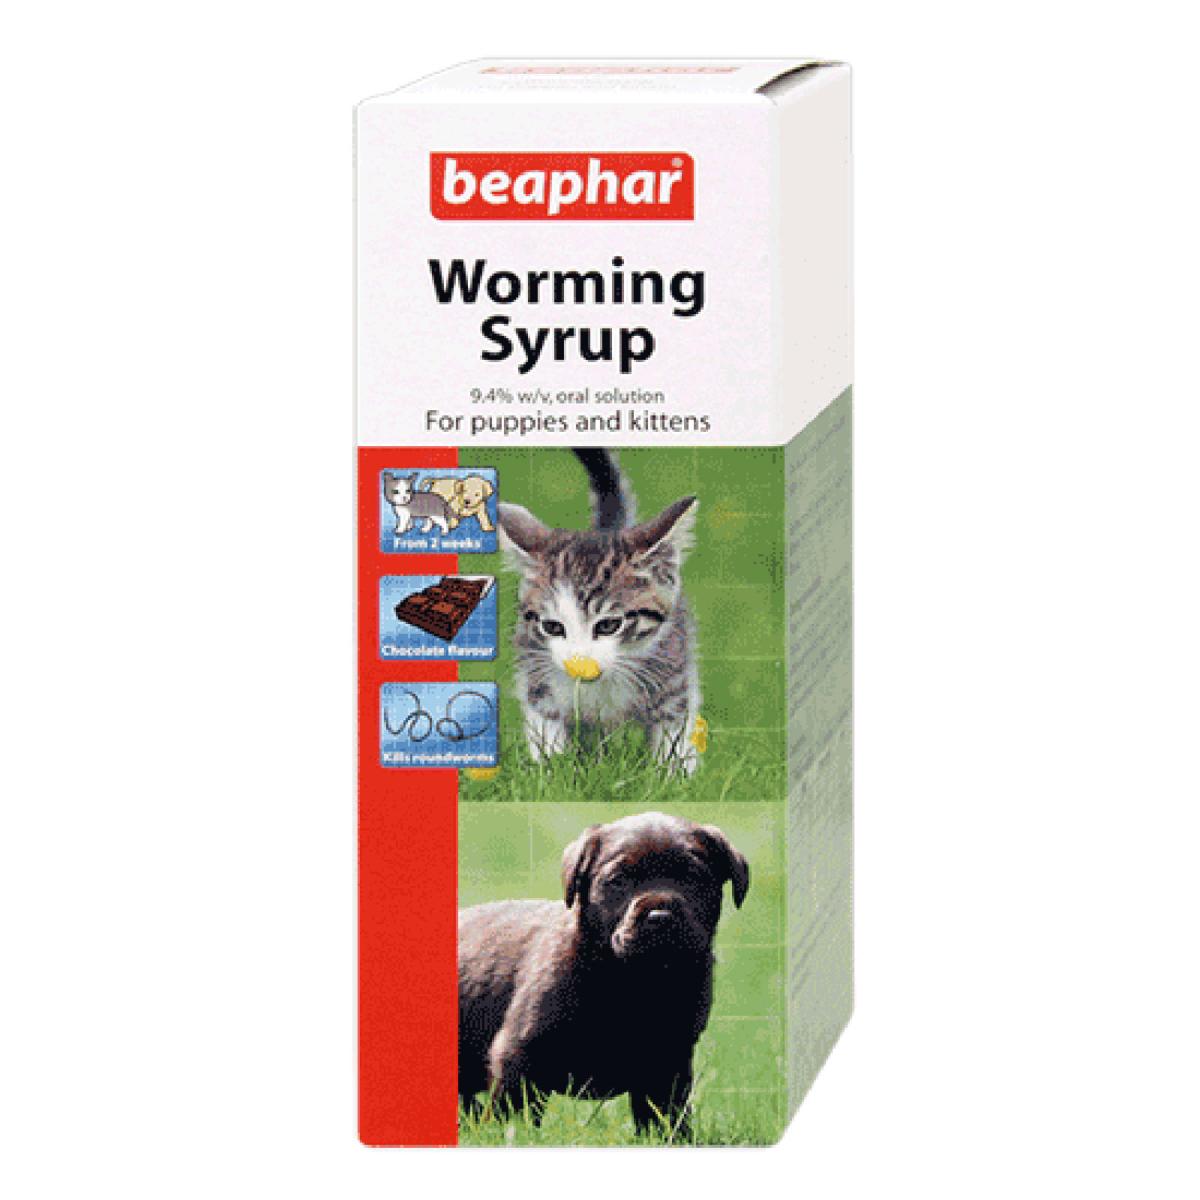 Beaphar | Puppy & Kitten Worm Control | Worming Syrup Oral Suspension